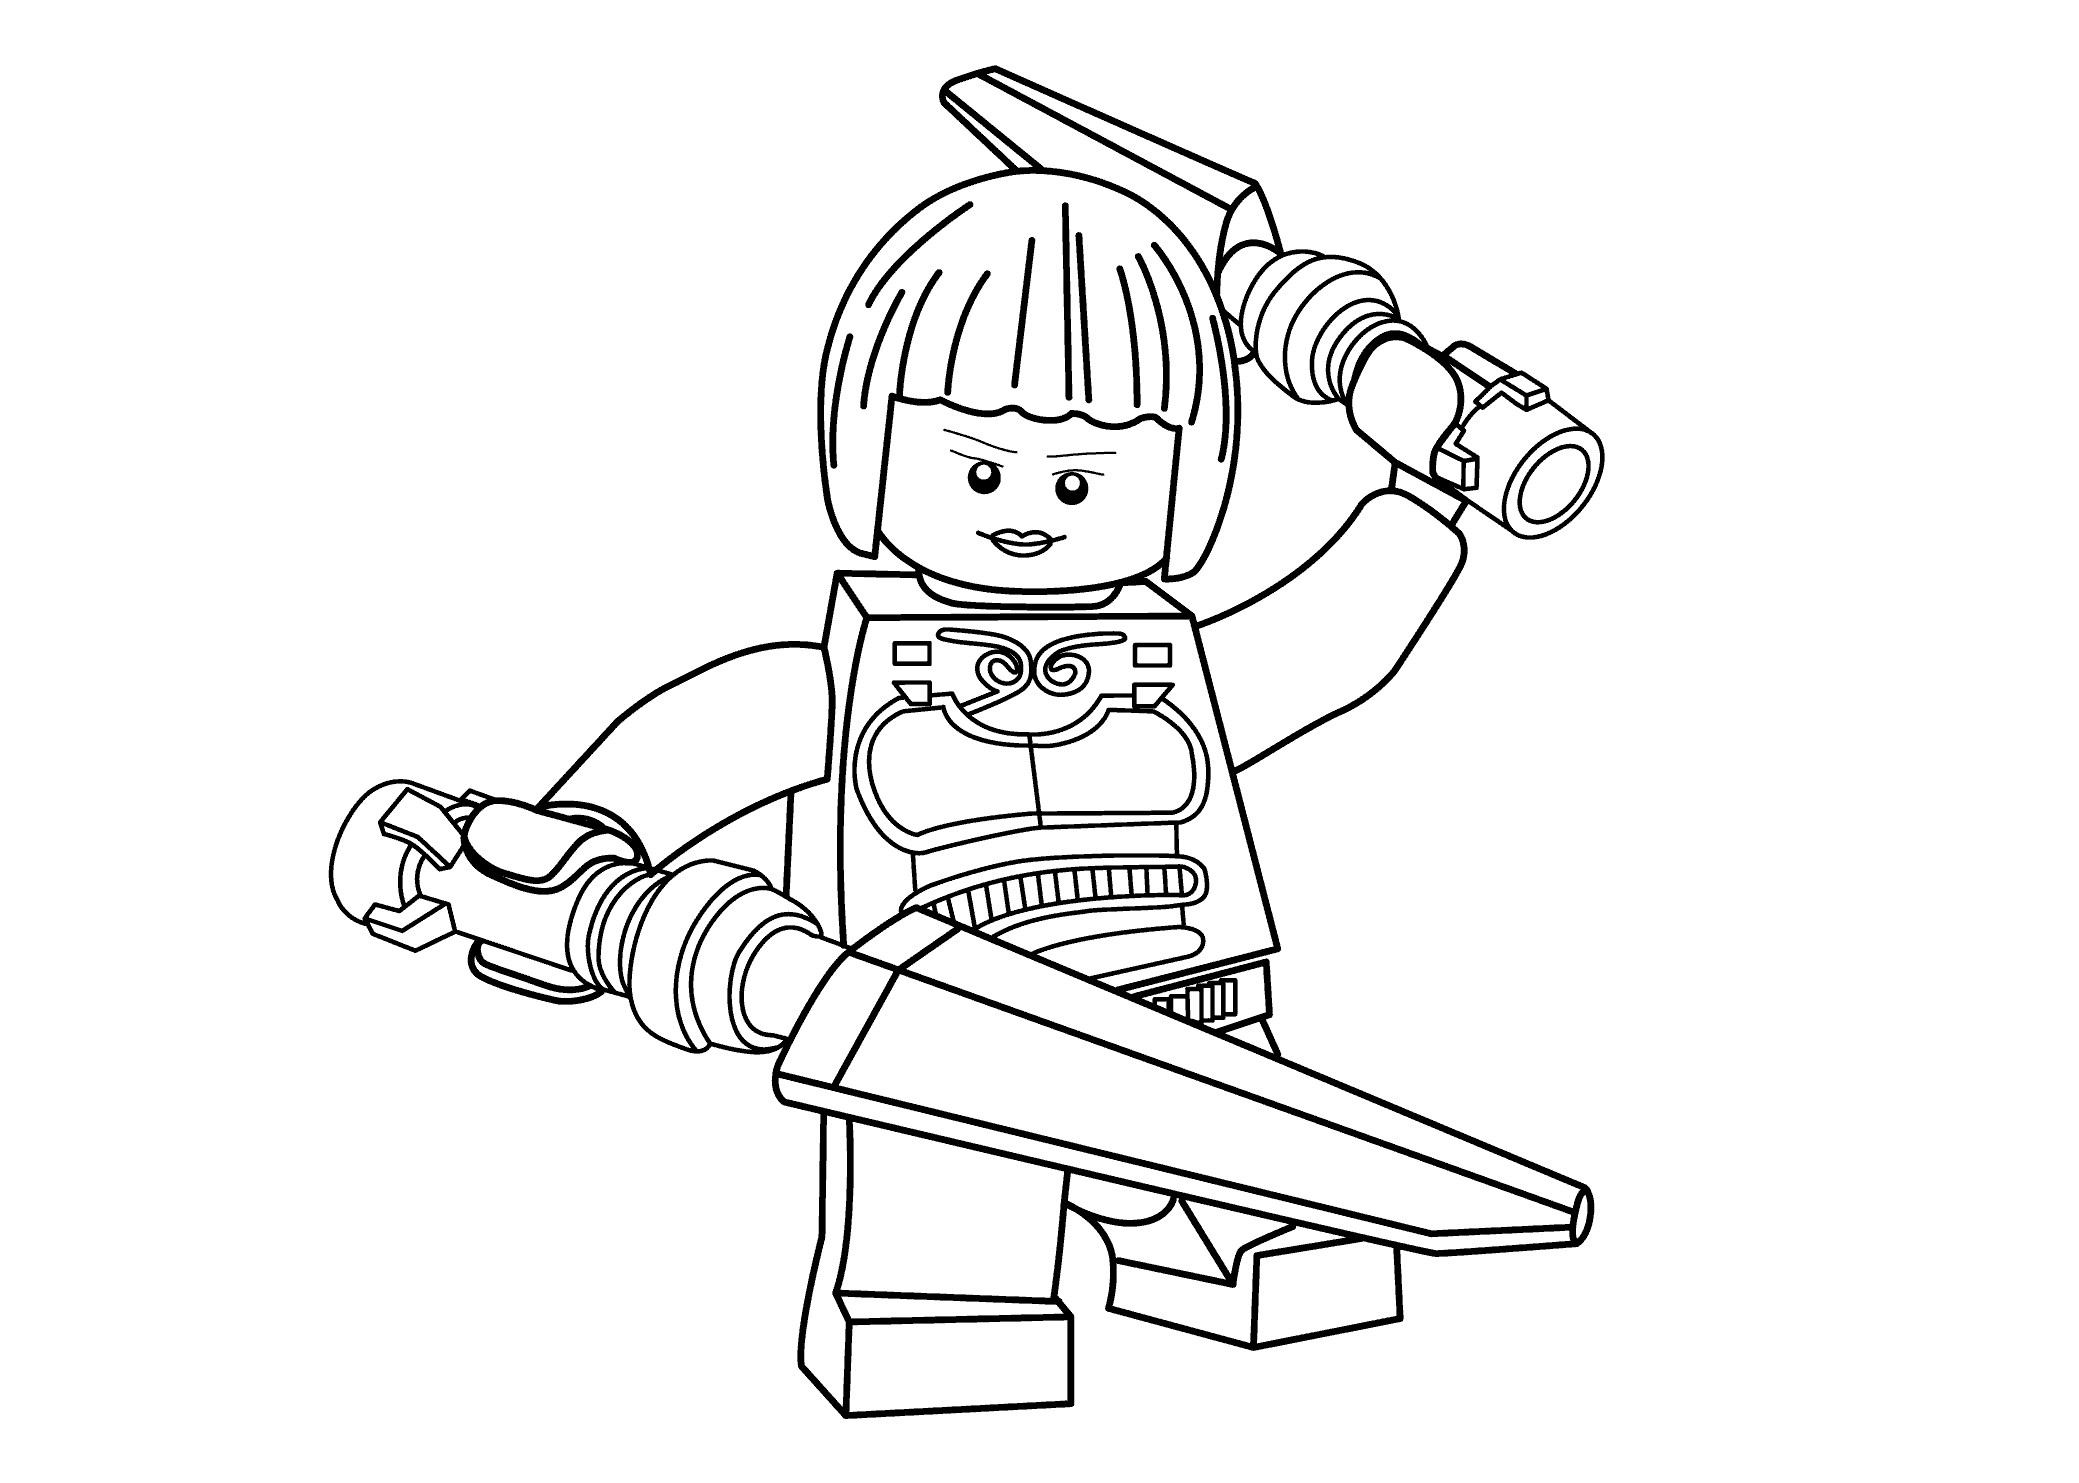 Lego Girls Coloring Pages
 Princesse Nya coloring page for girls Ninja go coloring